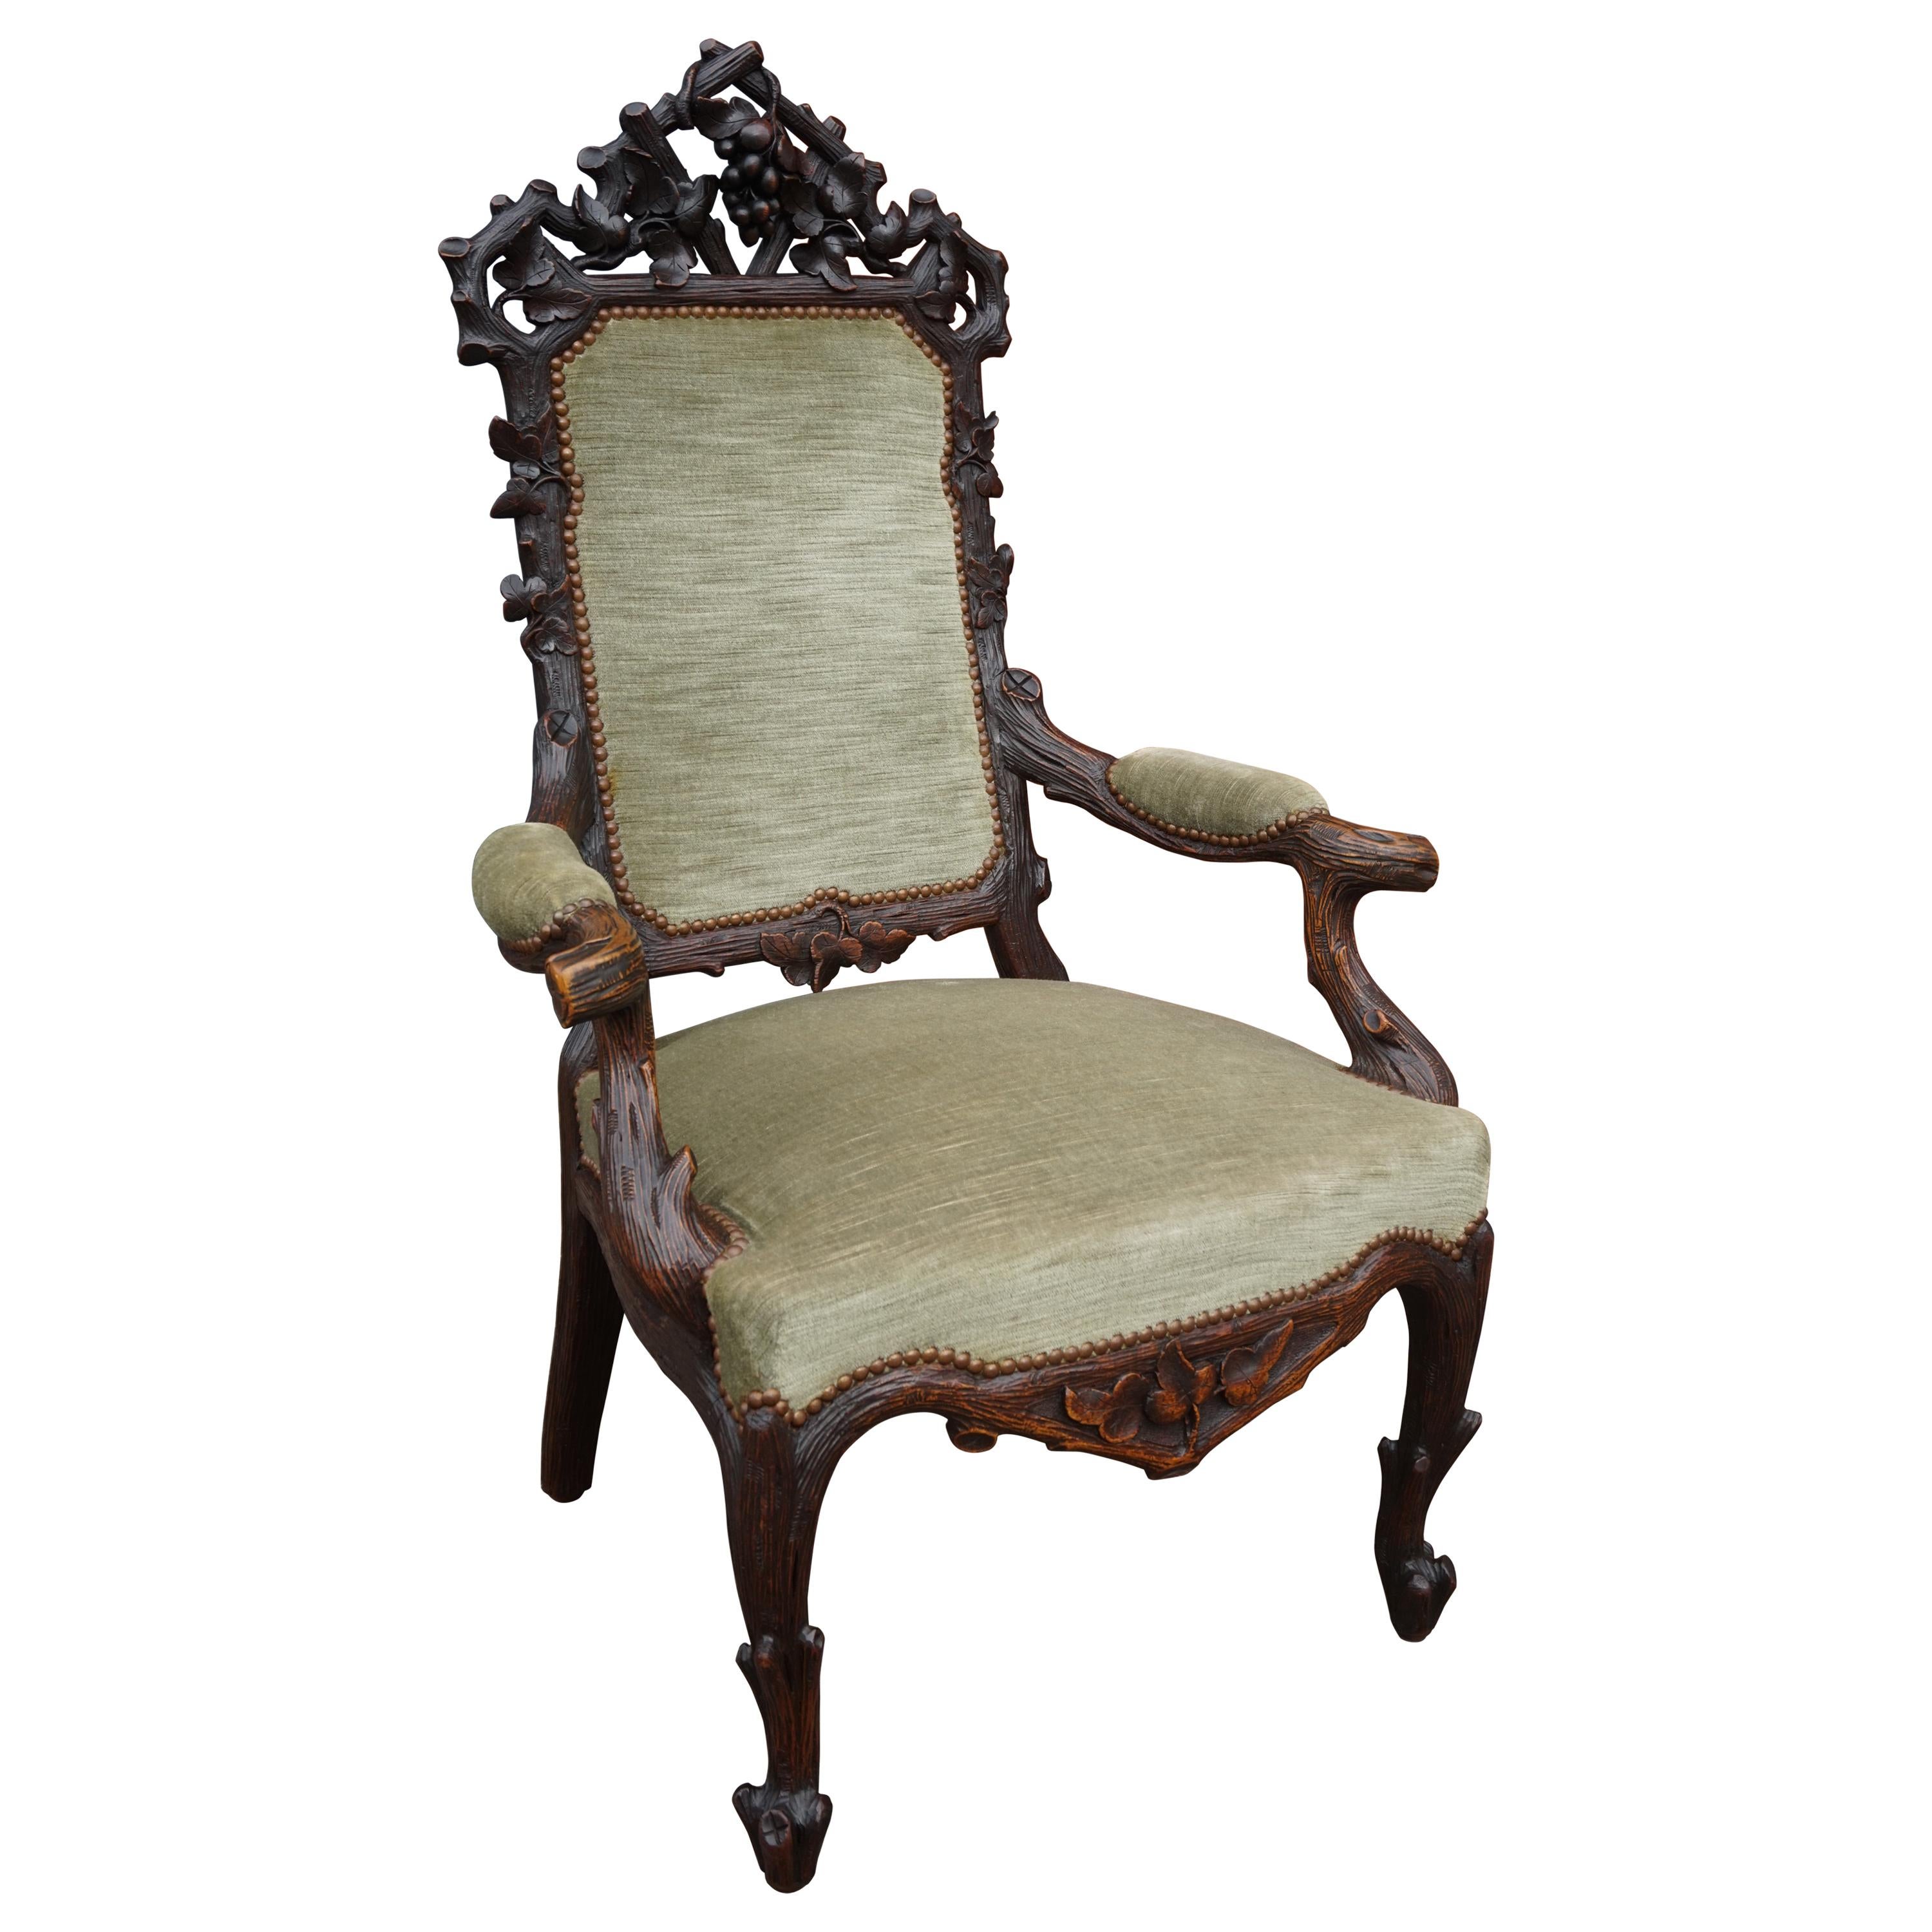 Antique Black Forest Armchair or Reading Chair by Horrix with Perfect Upholstery